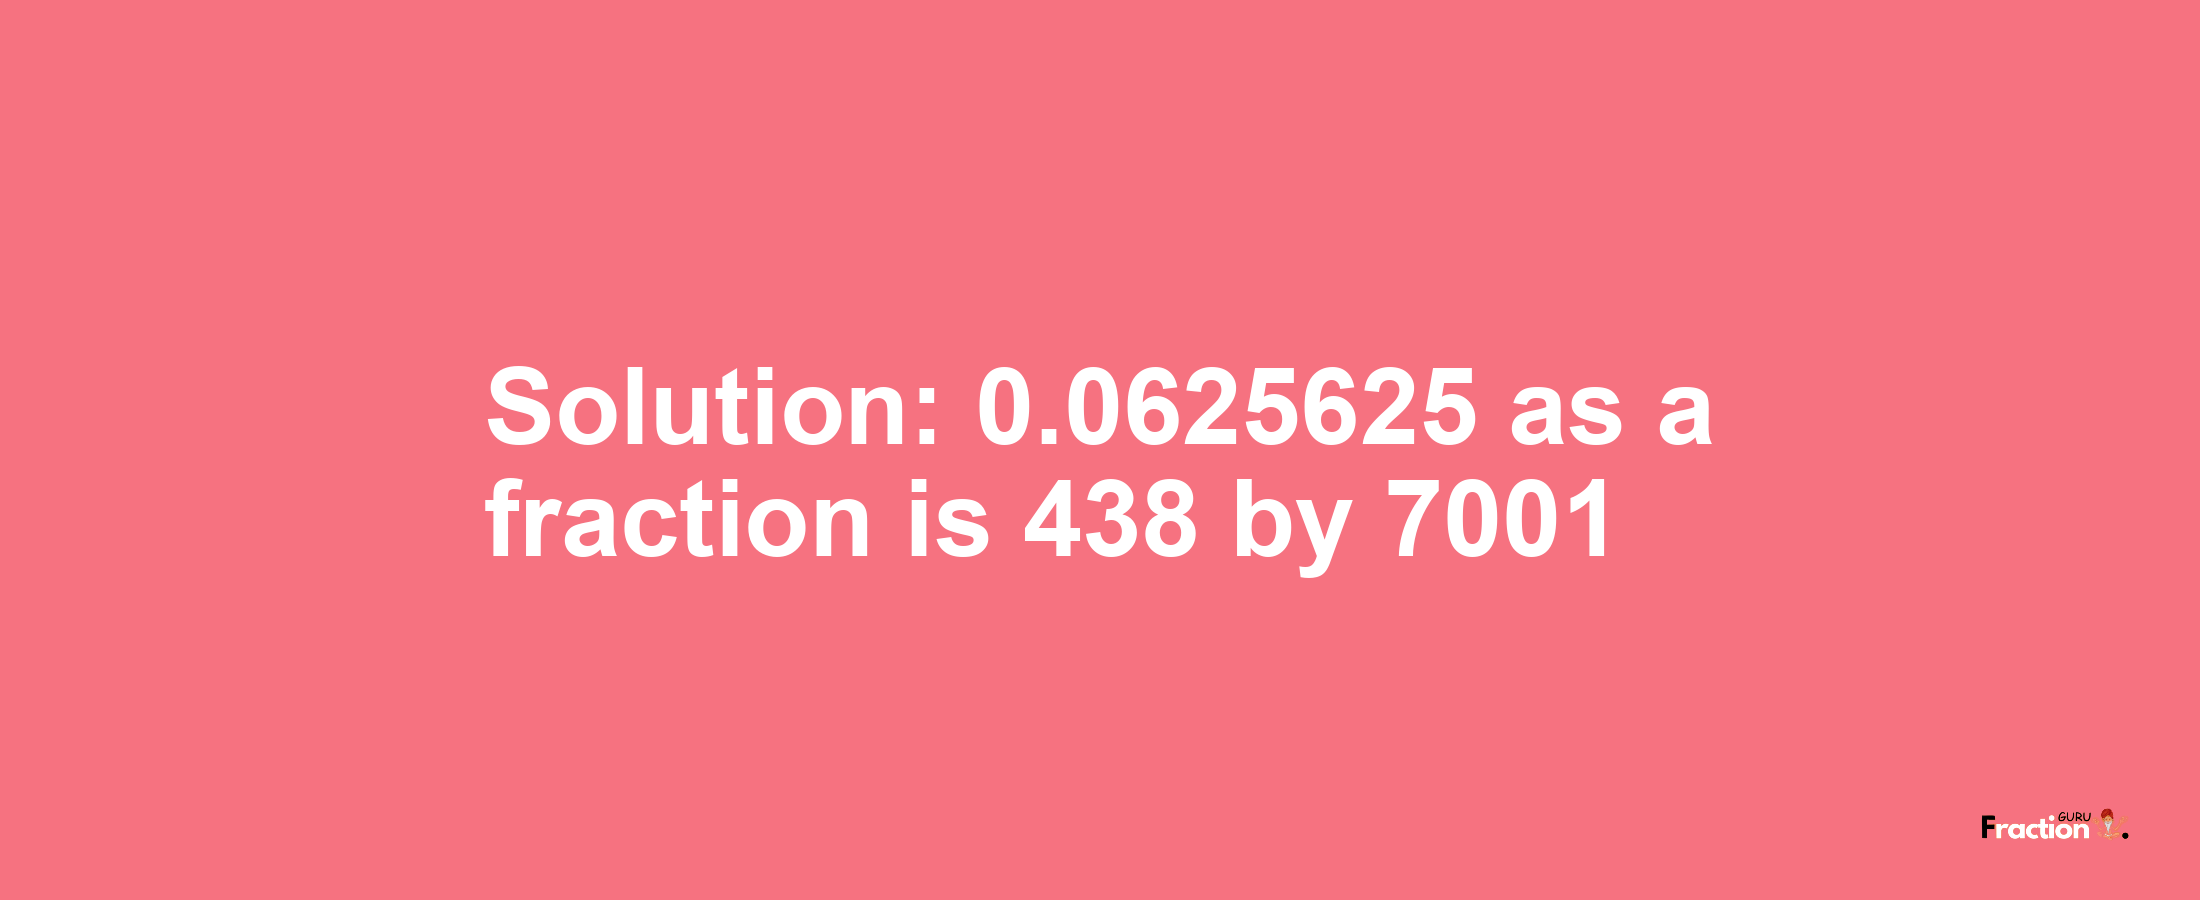 Solution:0.0625625 as a fraction is 438/7001